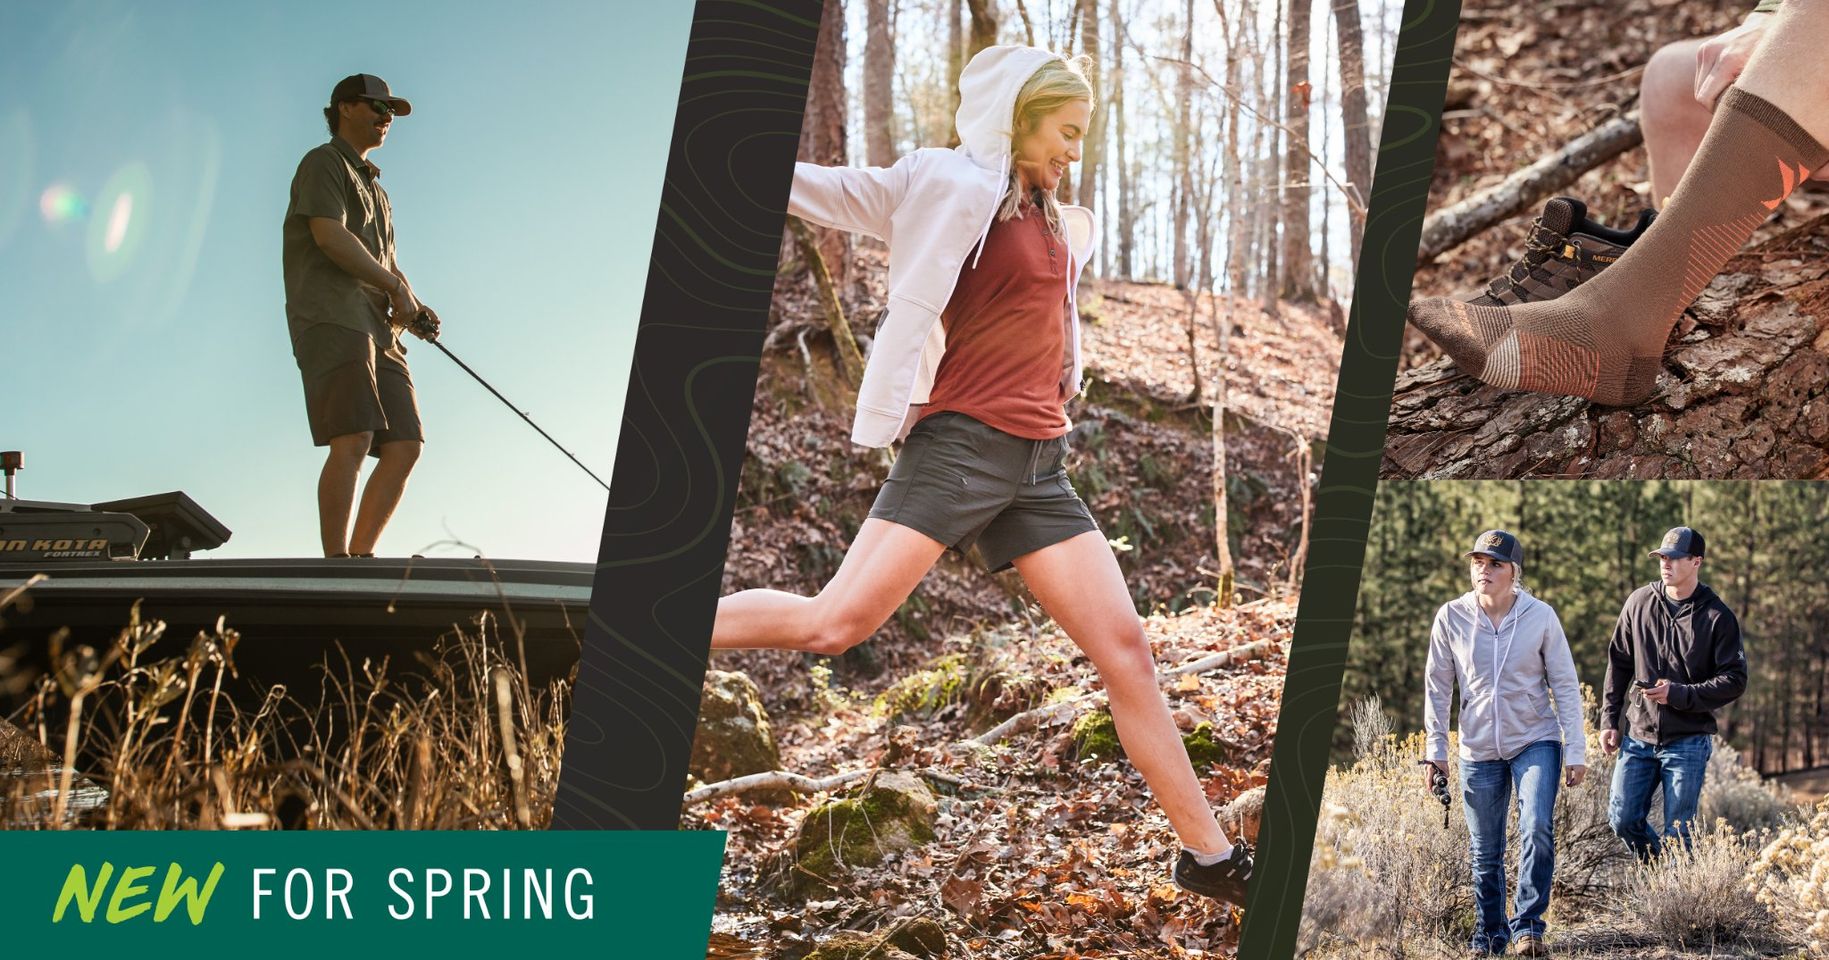 Introducing the New 2022 Vortex Spring and Summer Clothing Lineup